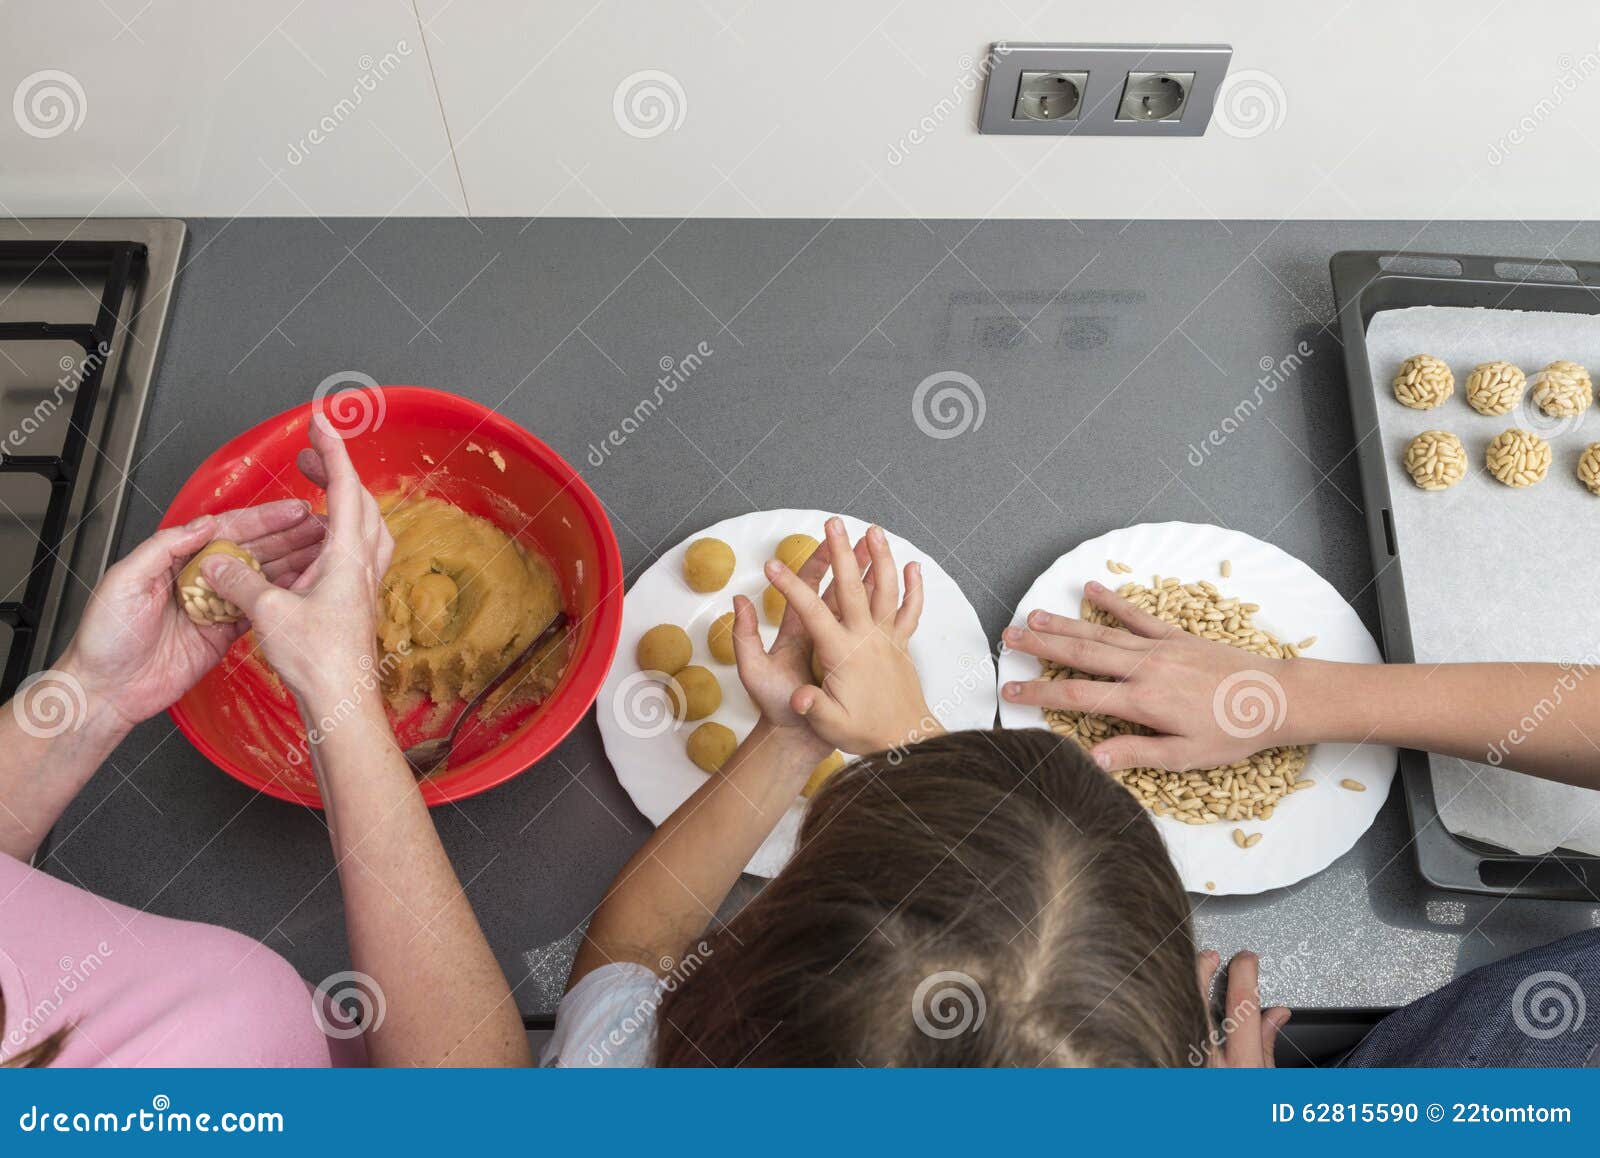 family preparing sweets in the kitchen